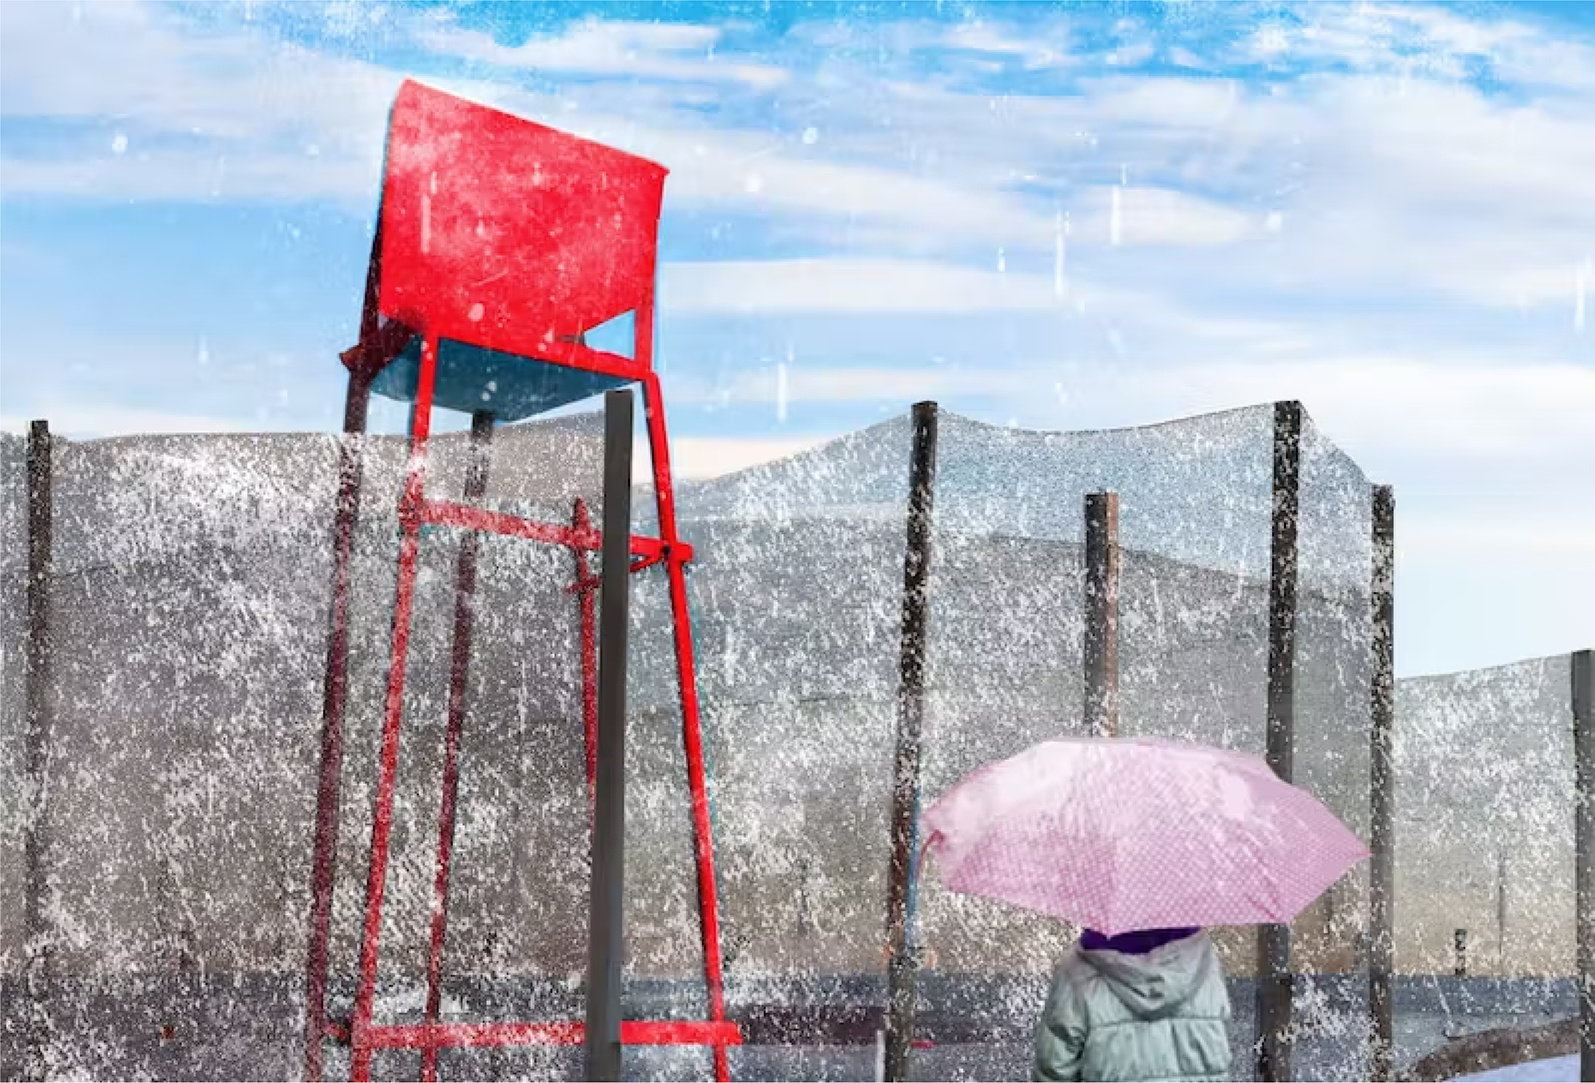 Person with a pink umbrella looking at an art installation based around a lifeguard's chair